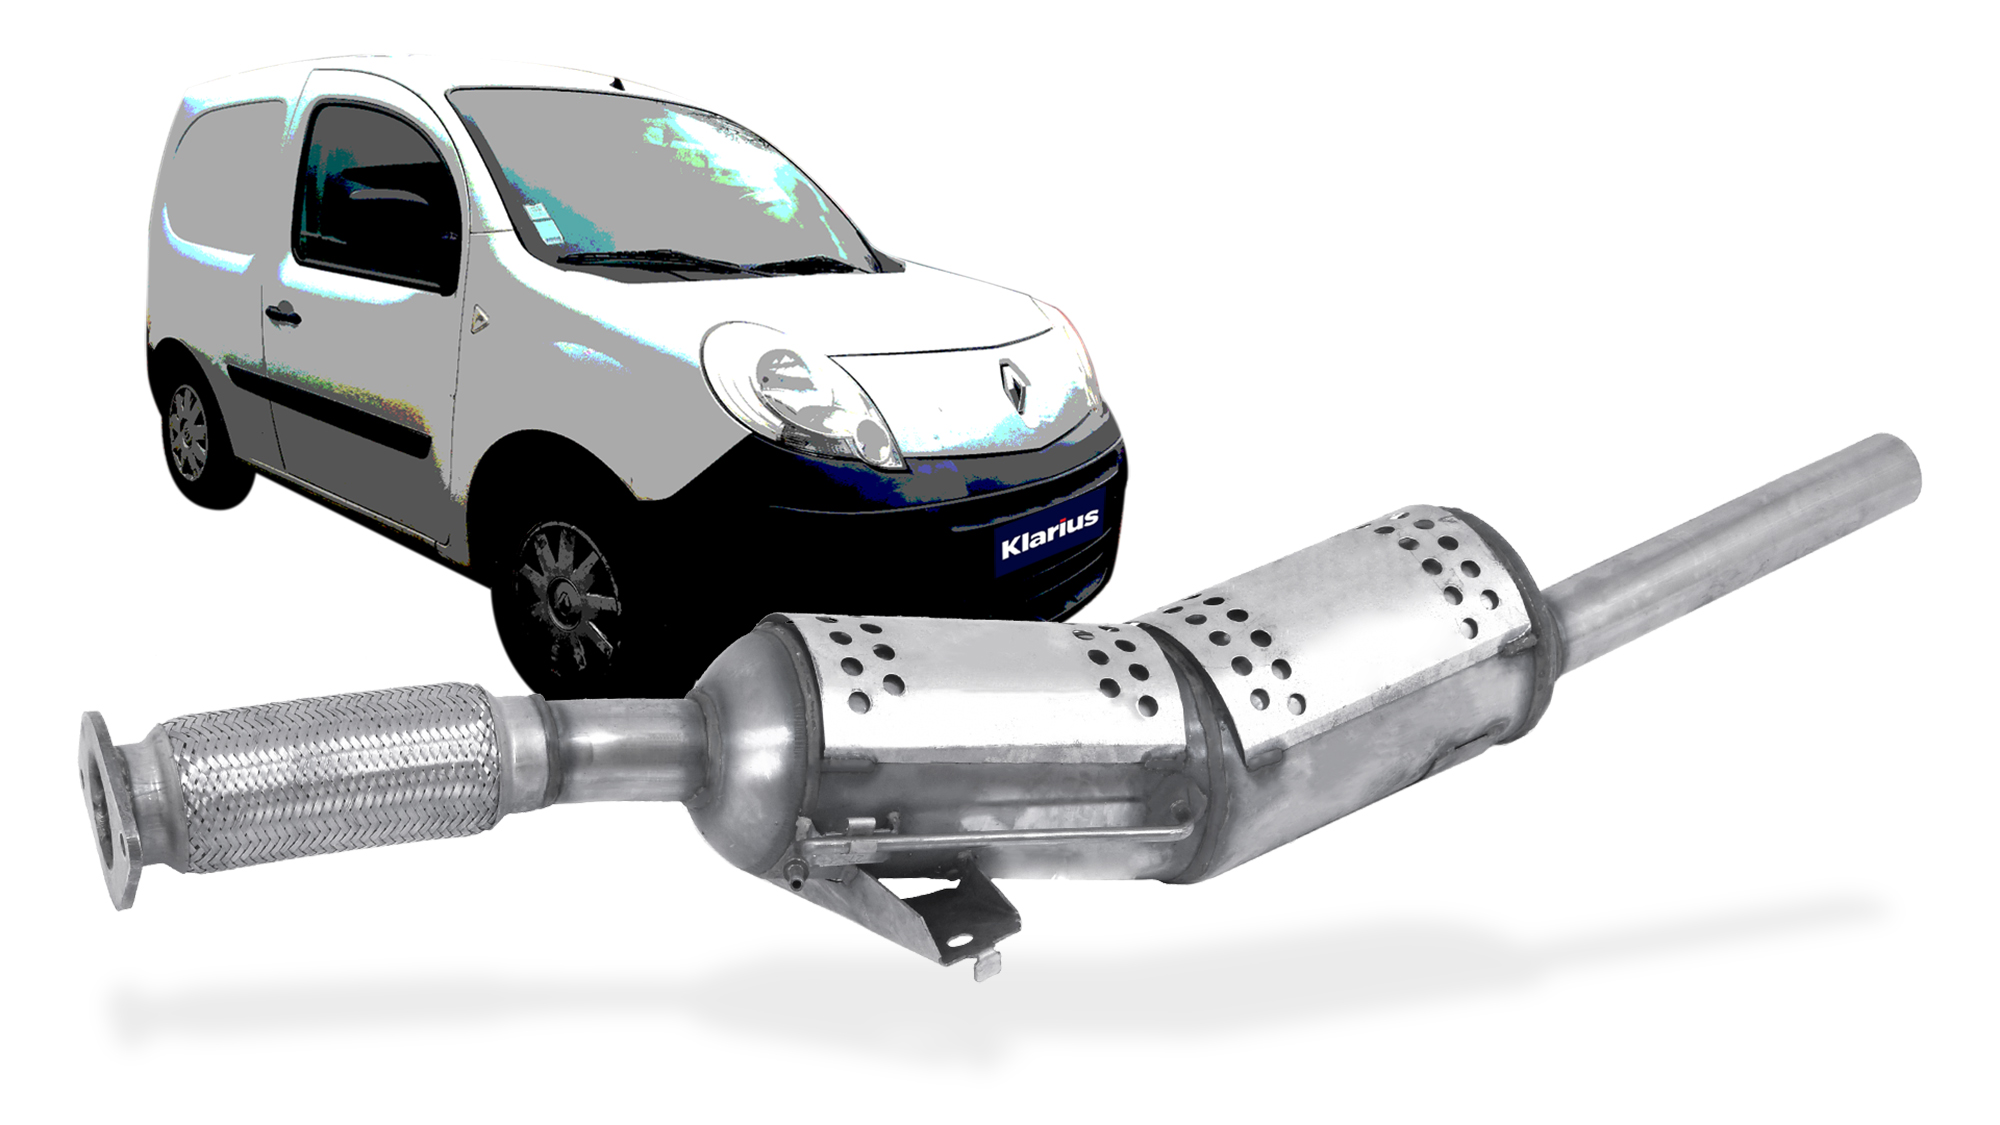 Klarius has added diesel particulate filters for the Renault Kangoo 1.5 dCi to its range